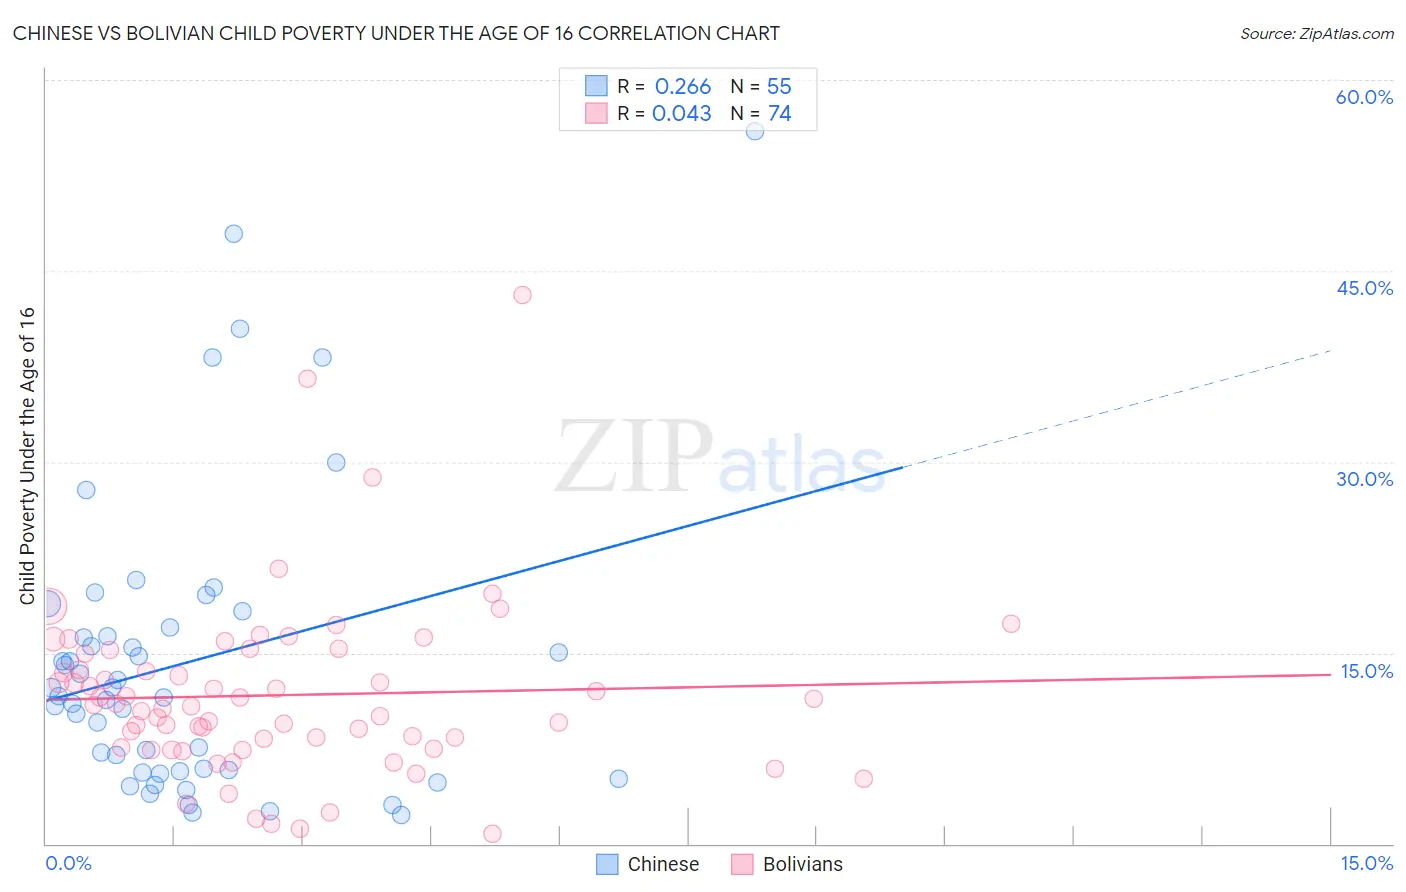 Chinese vs Bolivian Child Poverty Under the Age of 16